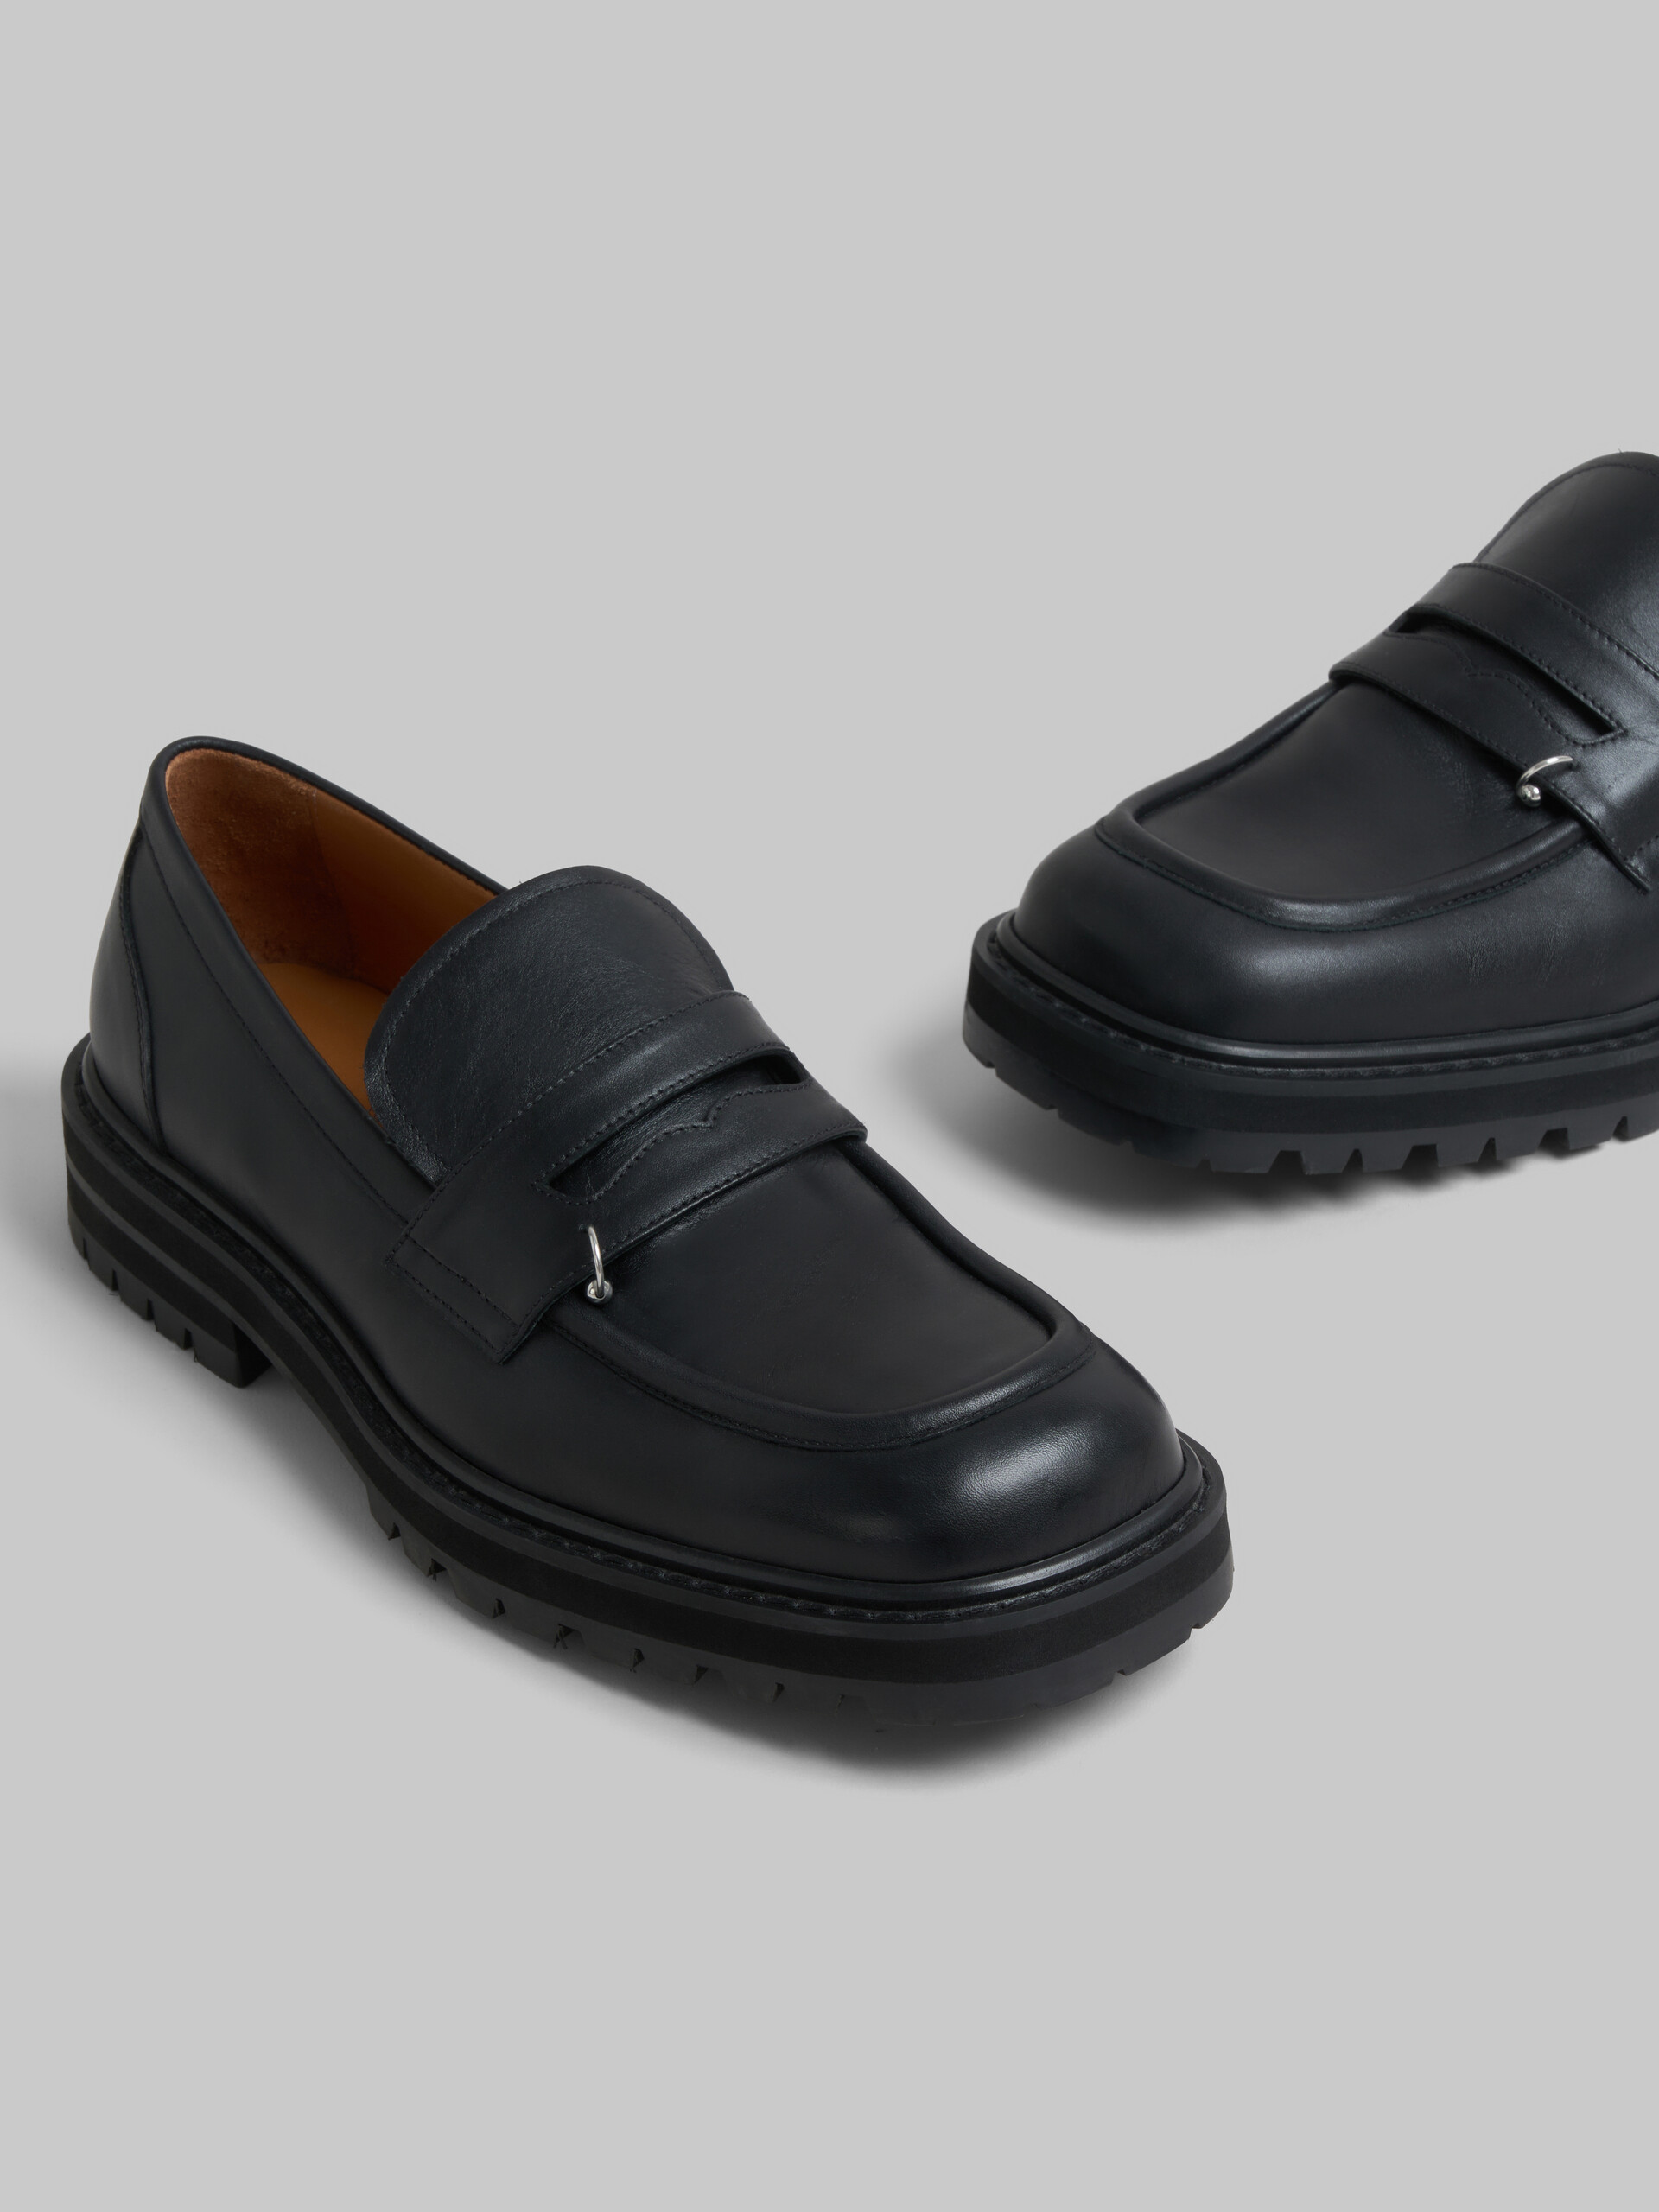 Black leather Piercing 2.0 chunky loafer - Lace-ups - Image 5